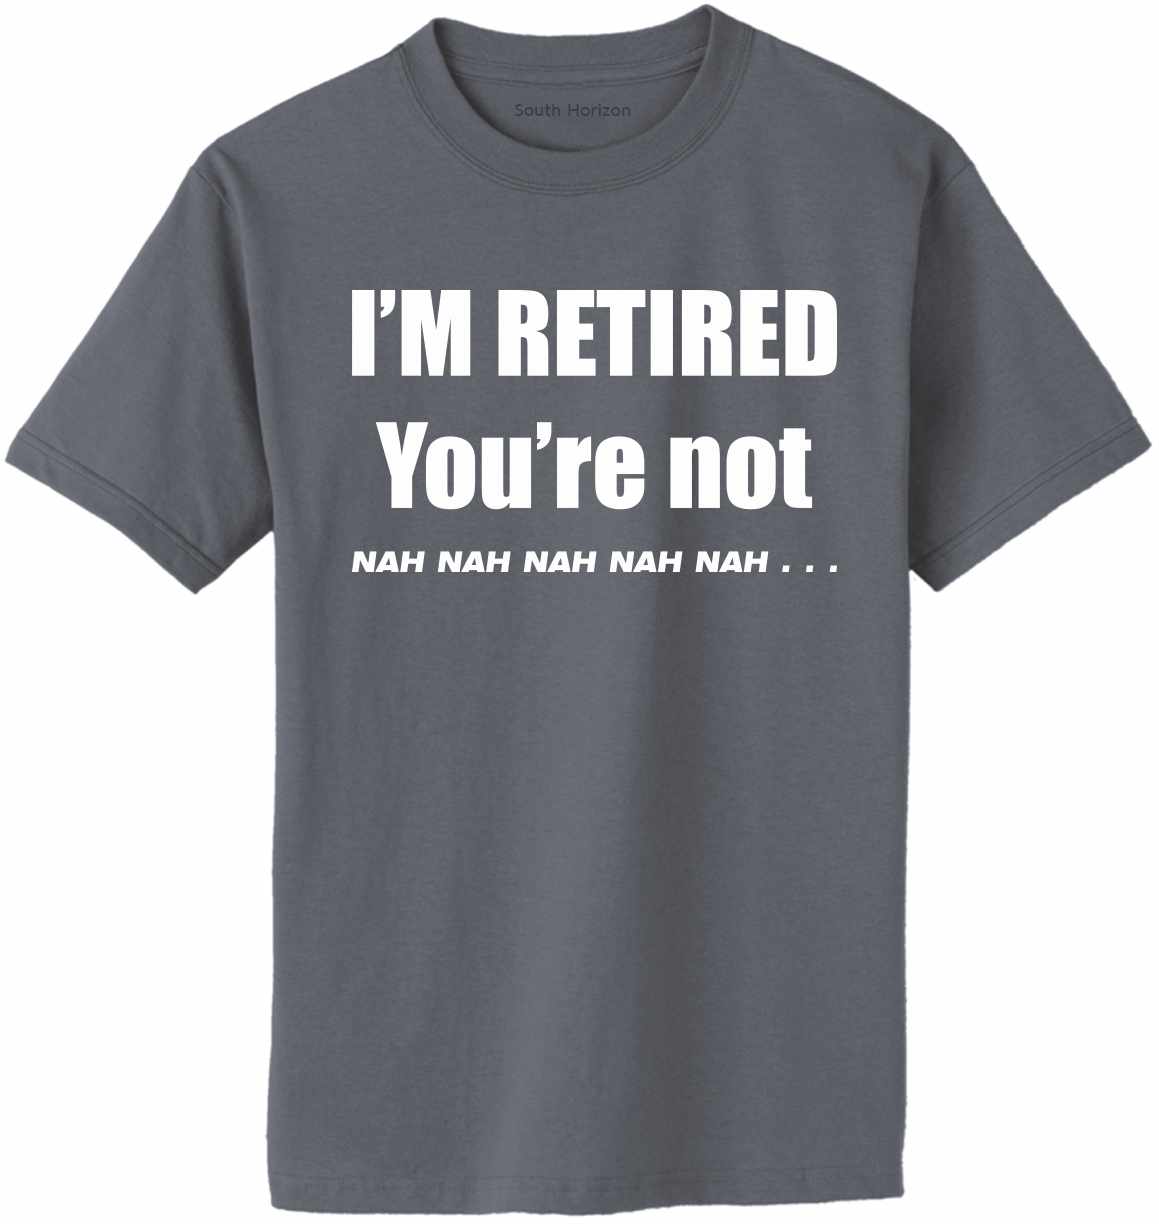 I'M RETIRED YOU ARE NOT, NAH, NAH, NAH Adult T-Shirt (#904-1)